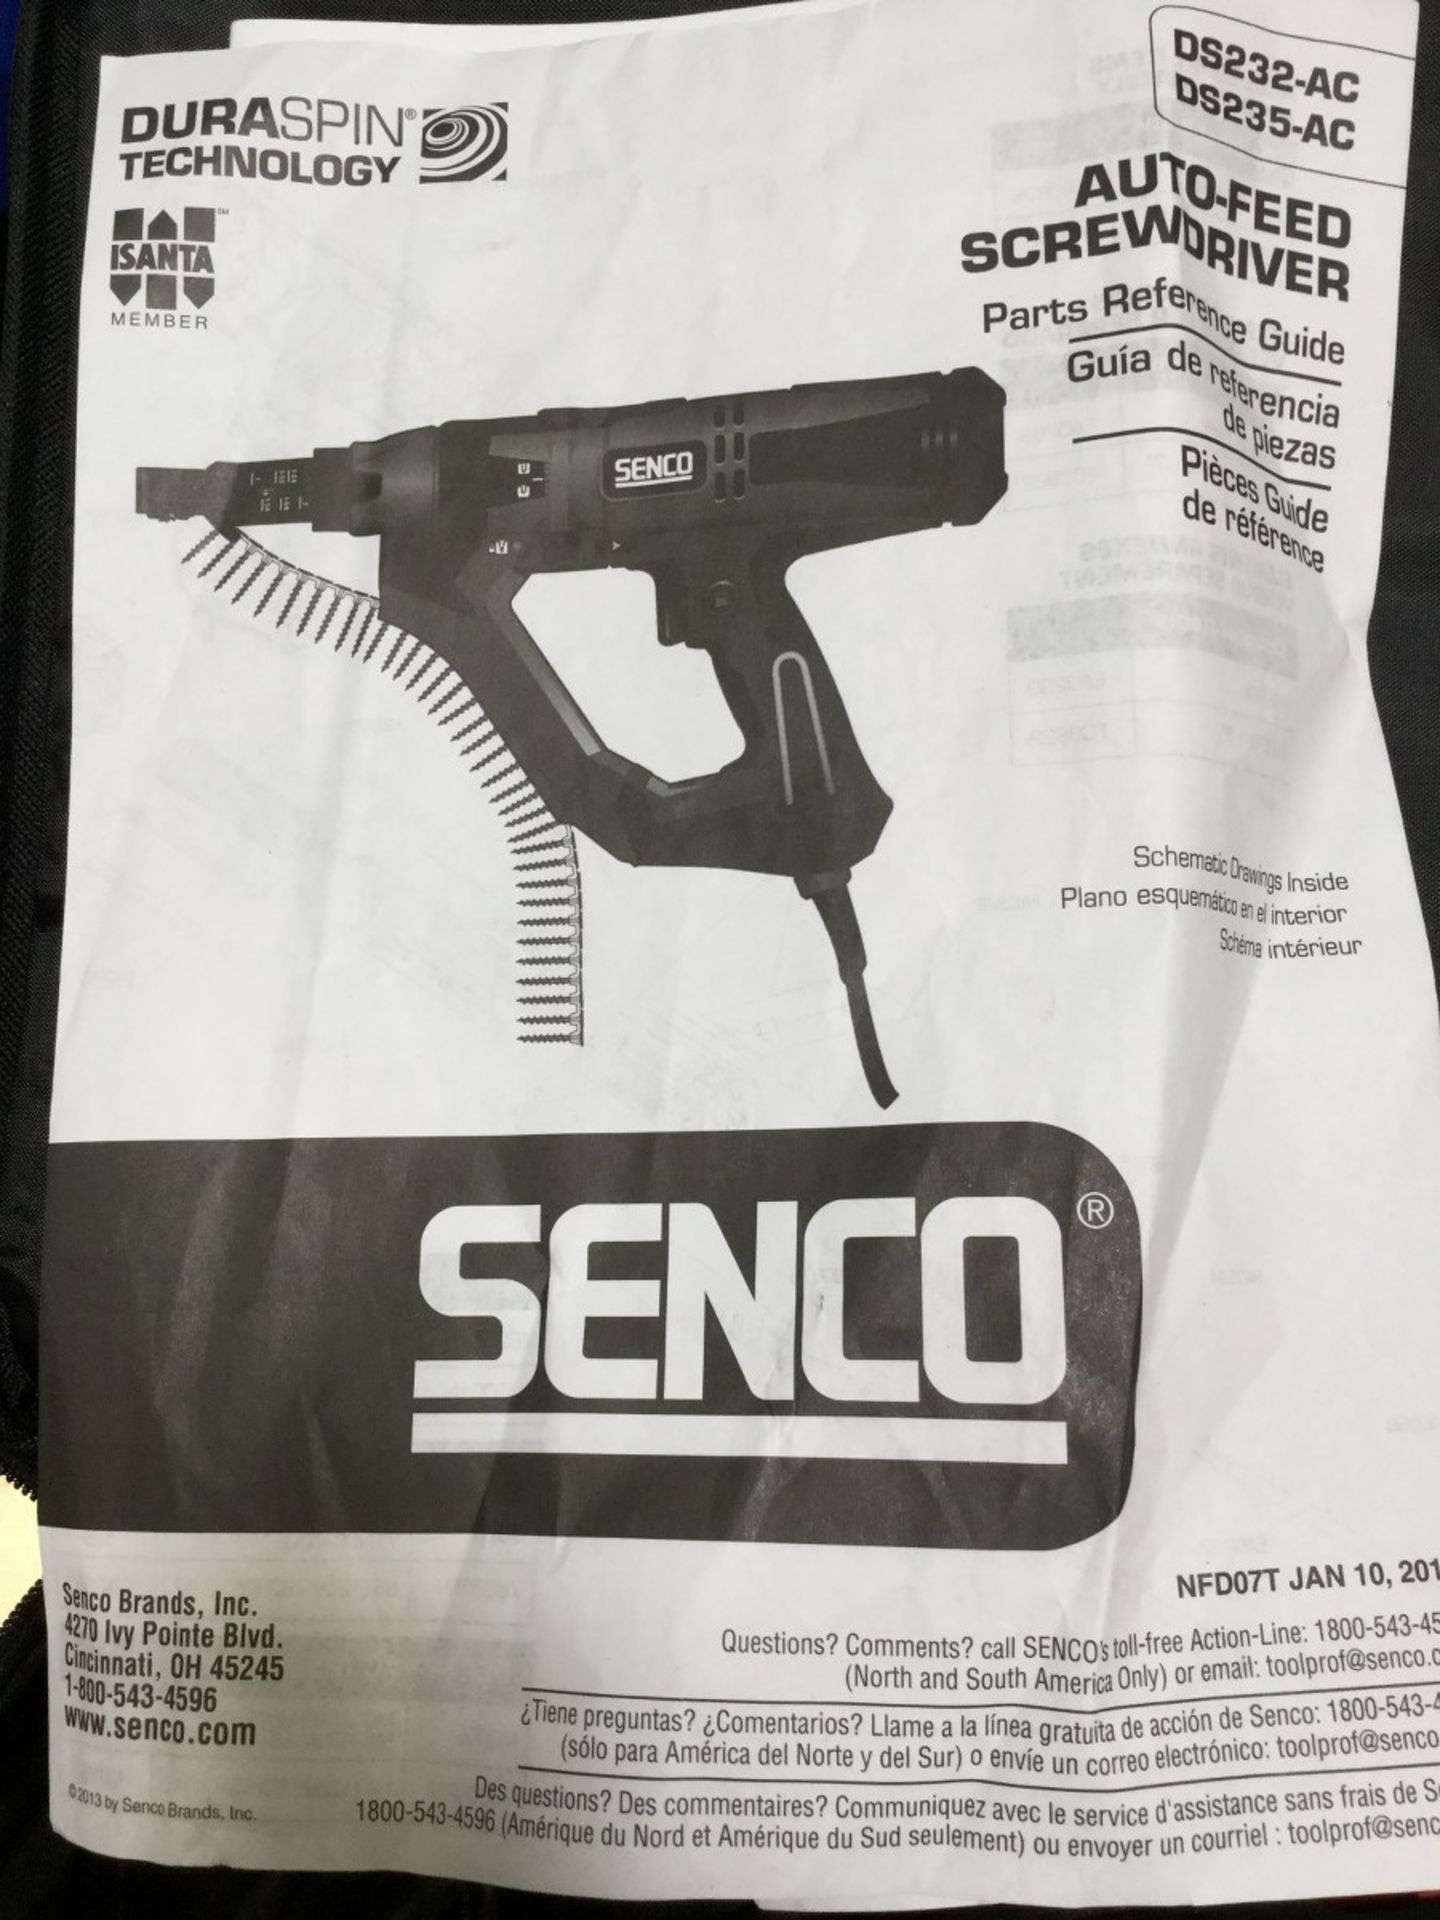 1 X DURASPIN TECHNOLOGY - SENCO AUTOFEED SCREWDRIVER - MODEL # DS232-AC - Image 2 of 2